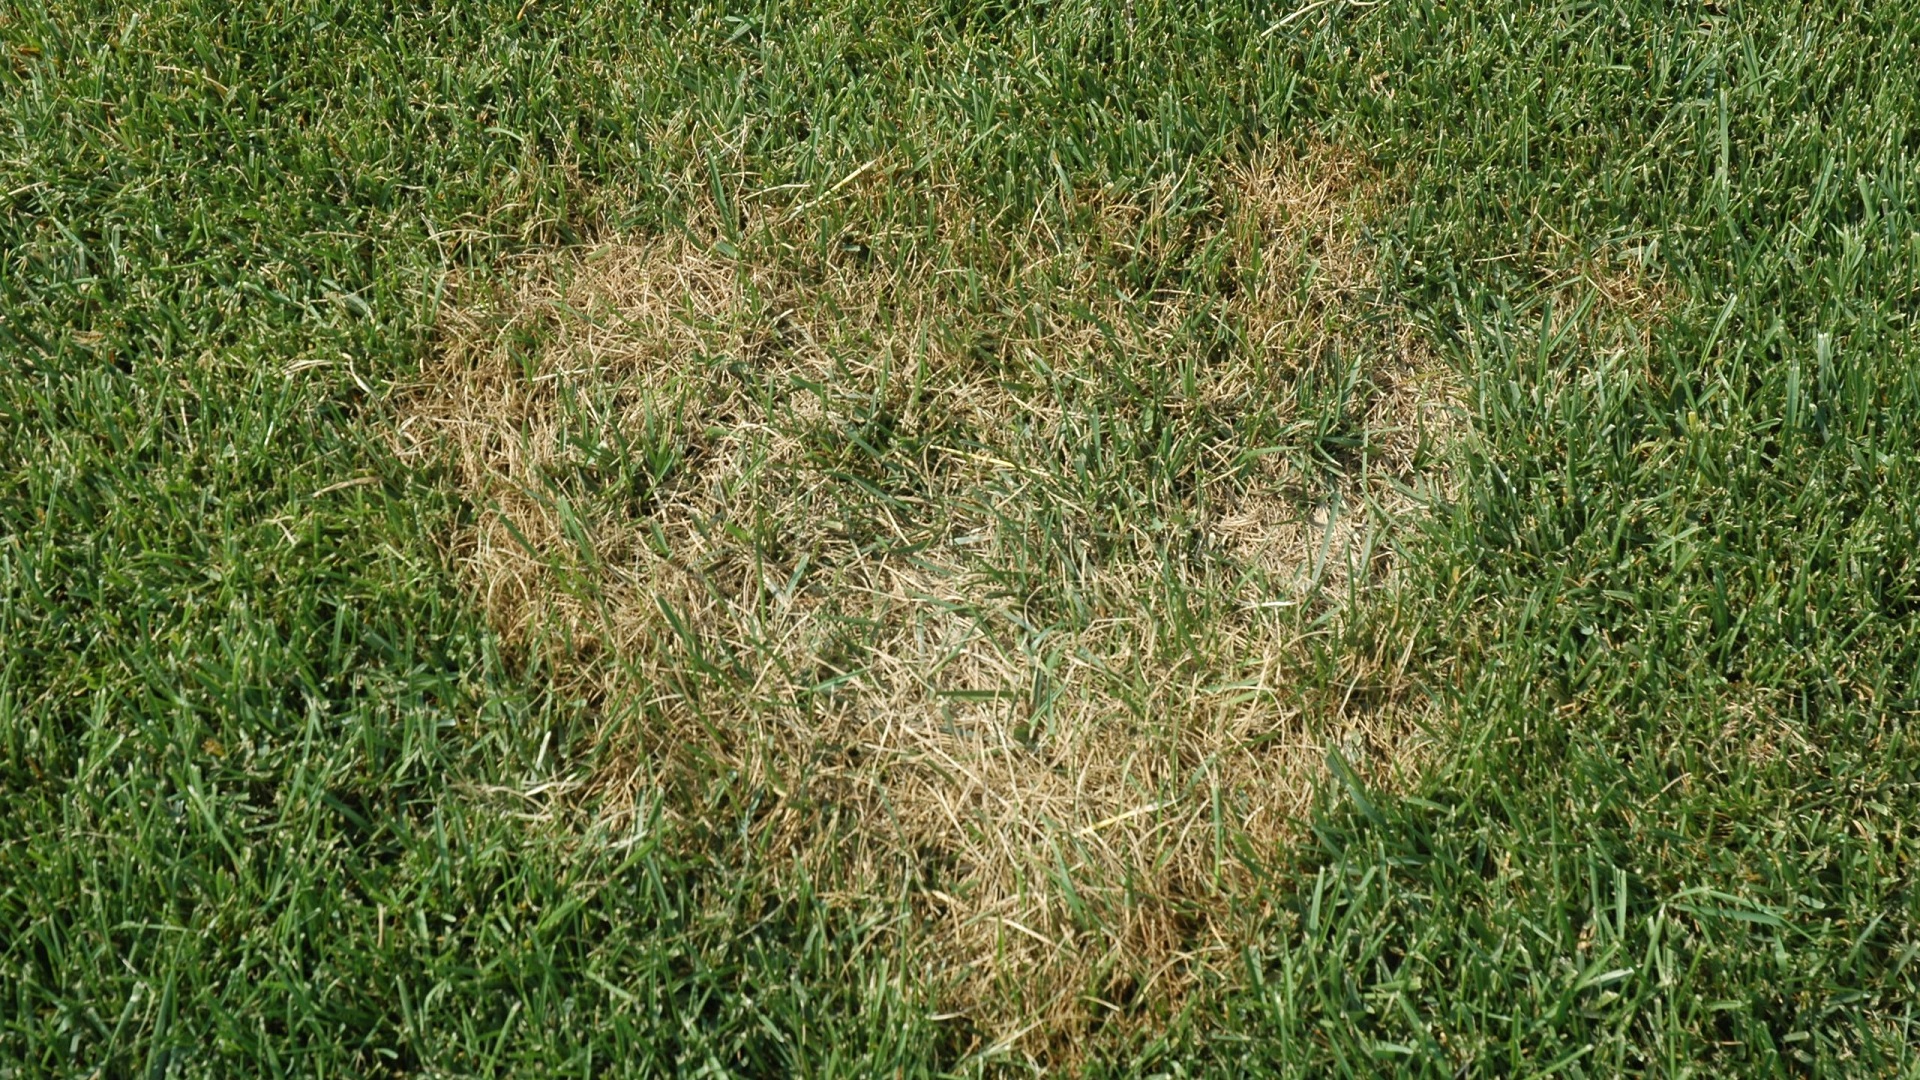 How to Get Rid of Brown Patch Fungus on Your Lawn